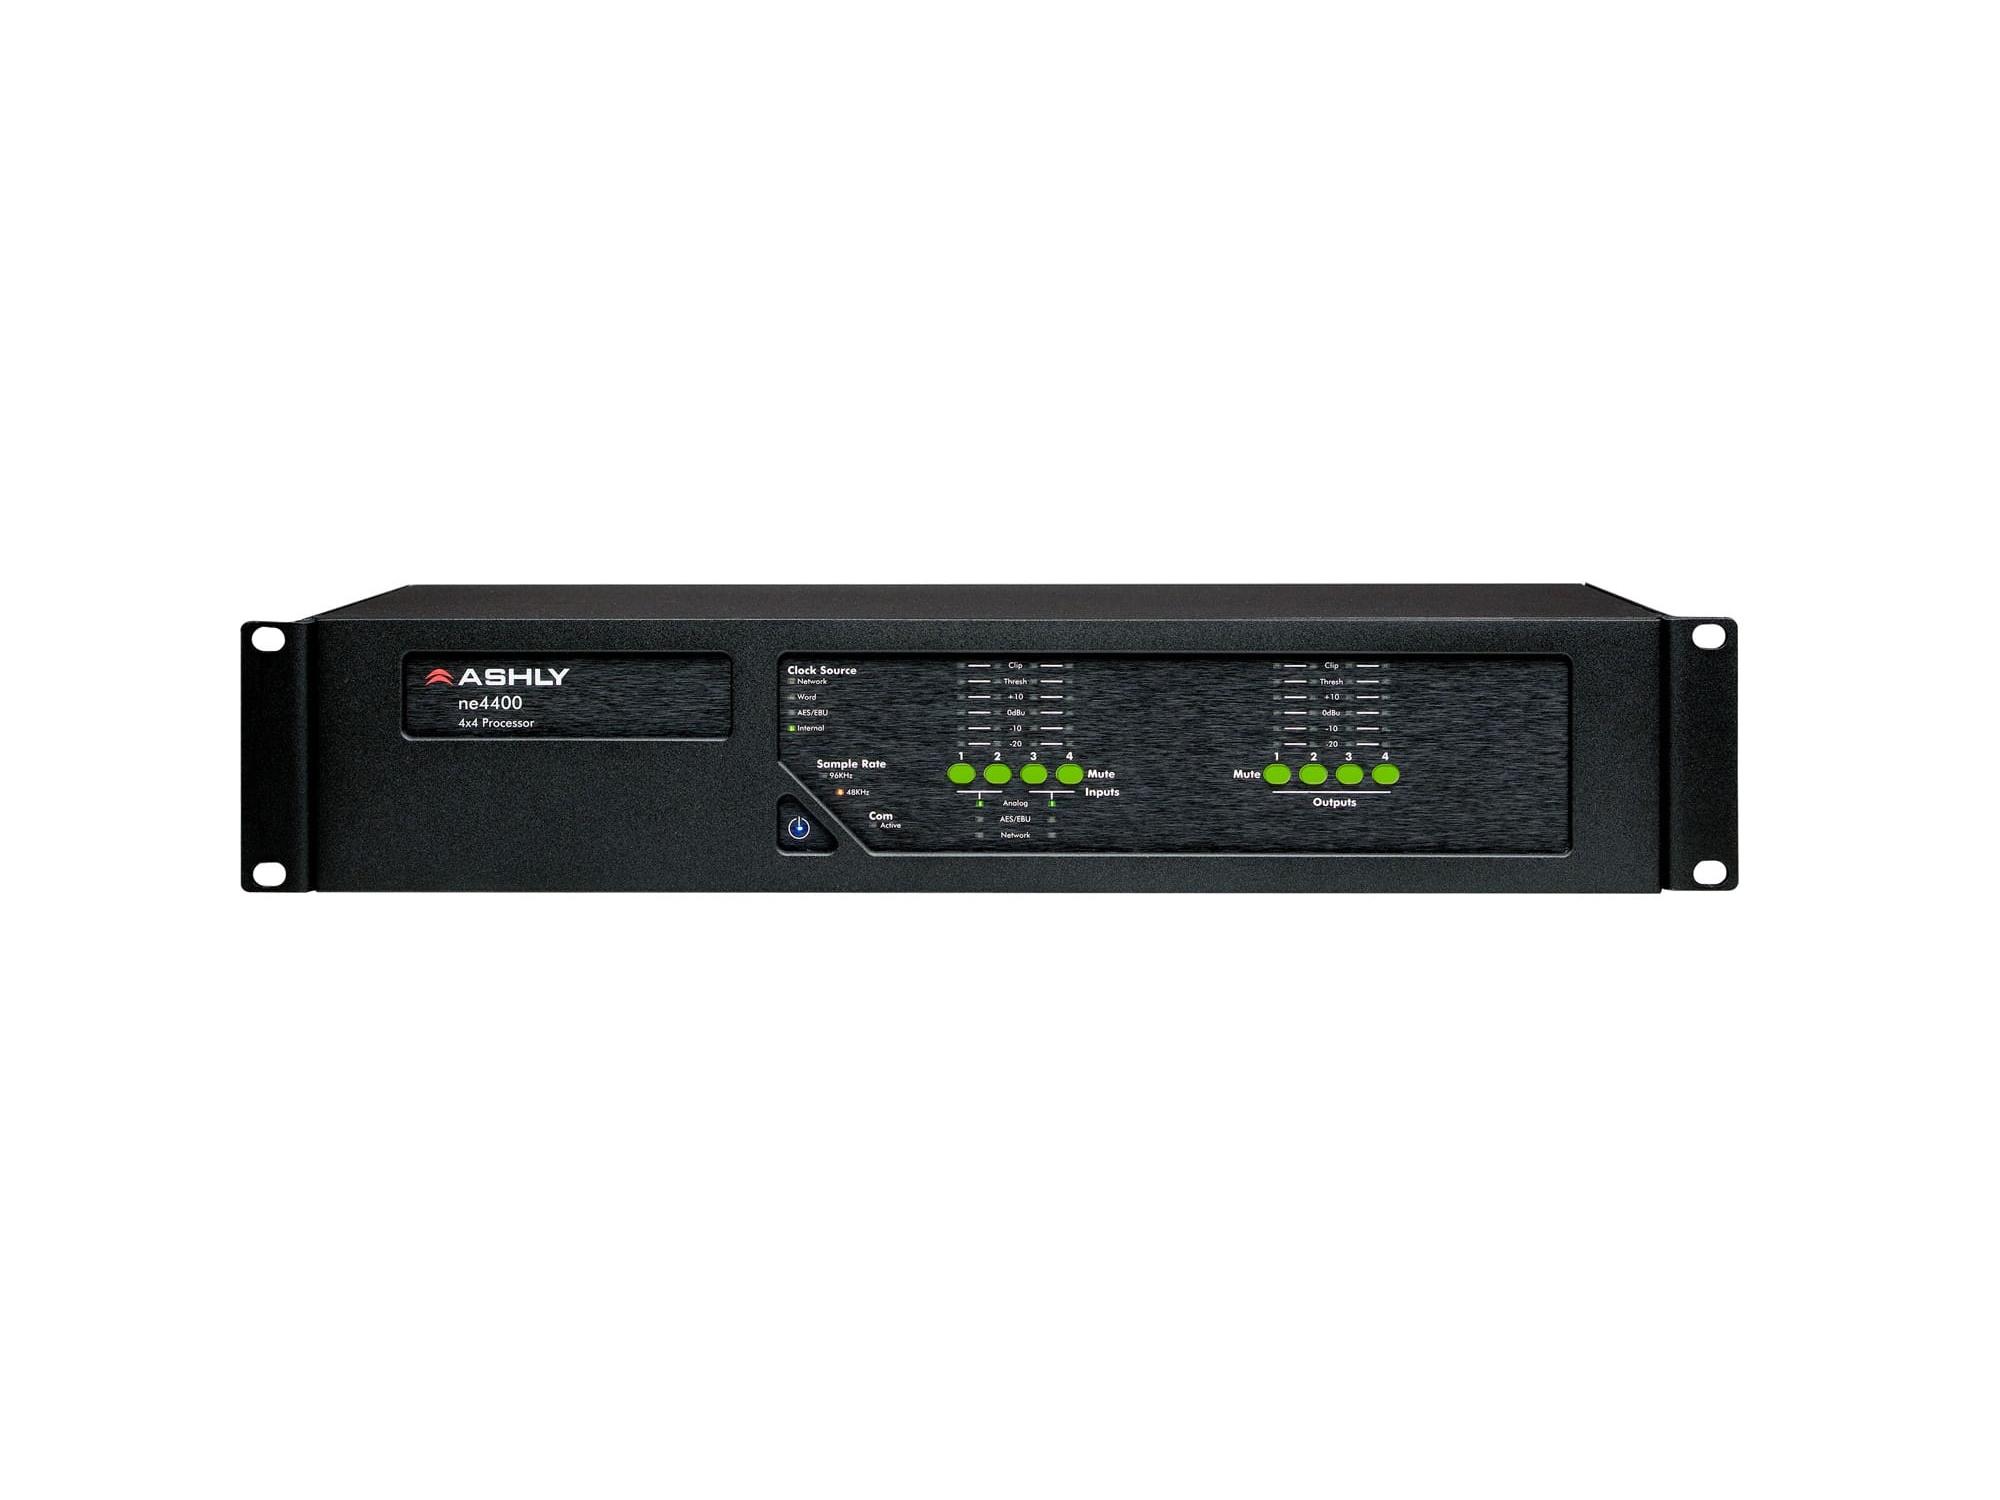 ne4400mst 4x4 Protea DSP Audio System Processor with 4-Ch Mic Inputs/4Ch AES3 Outputs and Dante Card by Ashly